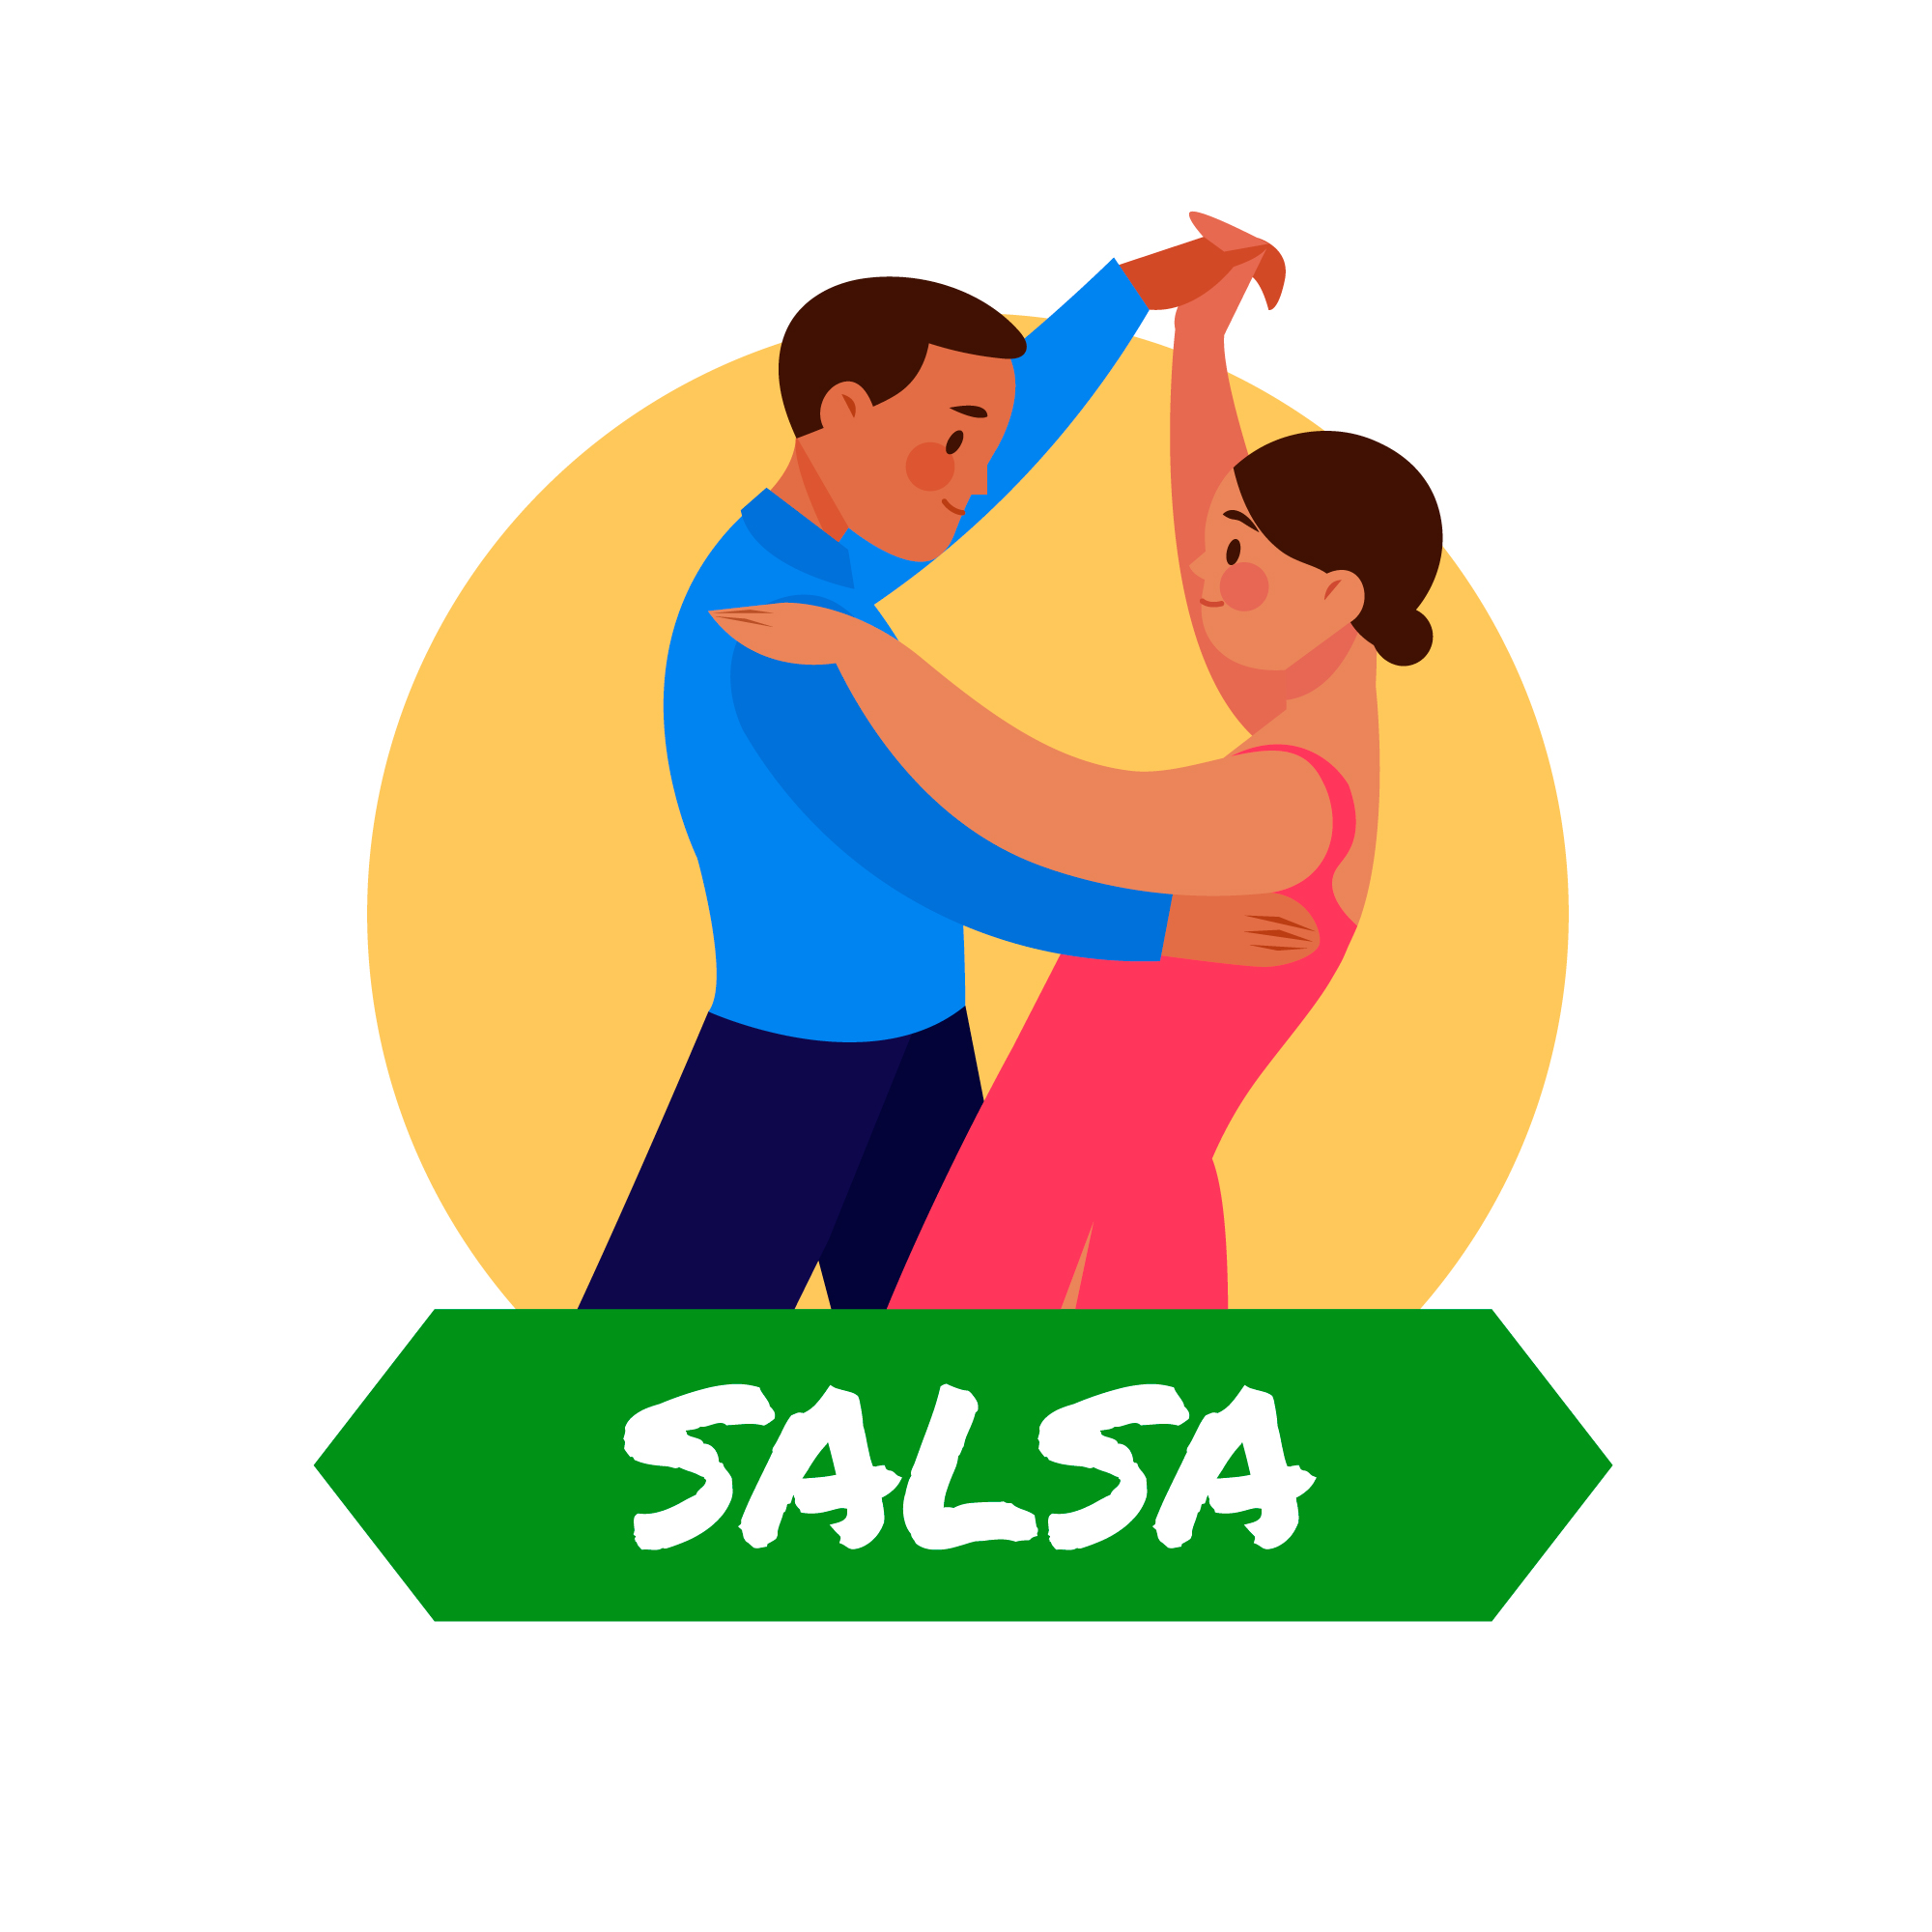 Learn salsa dancing at the library!